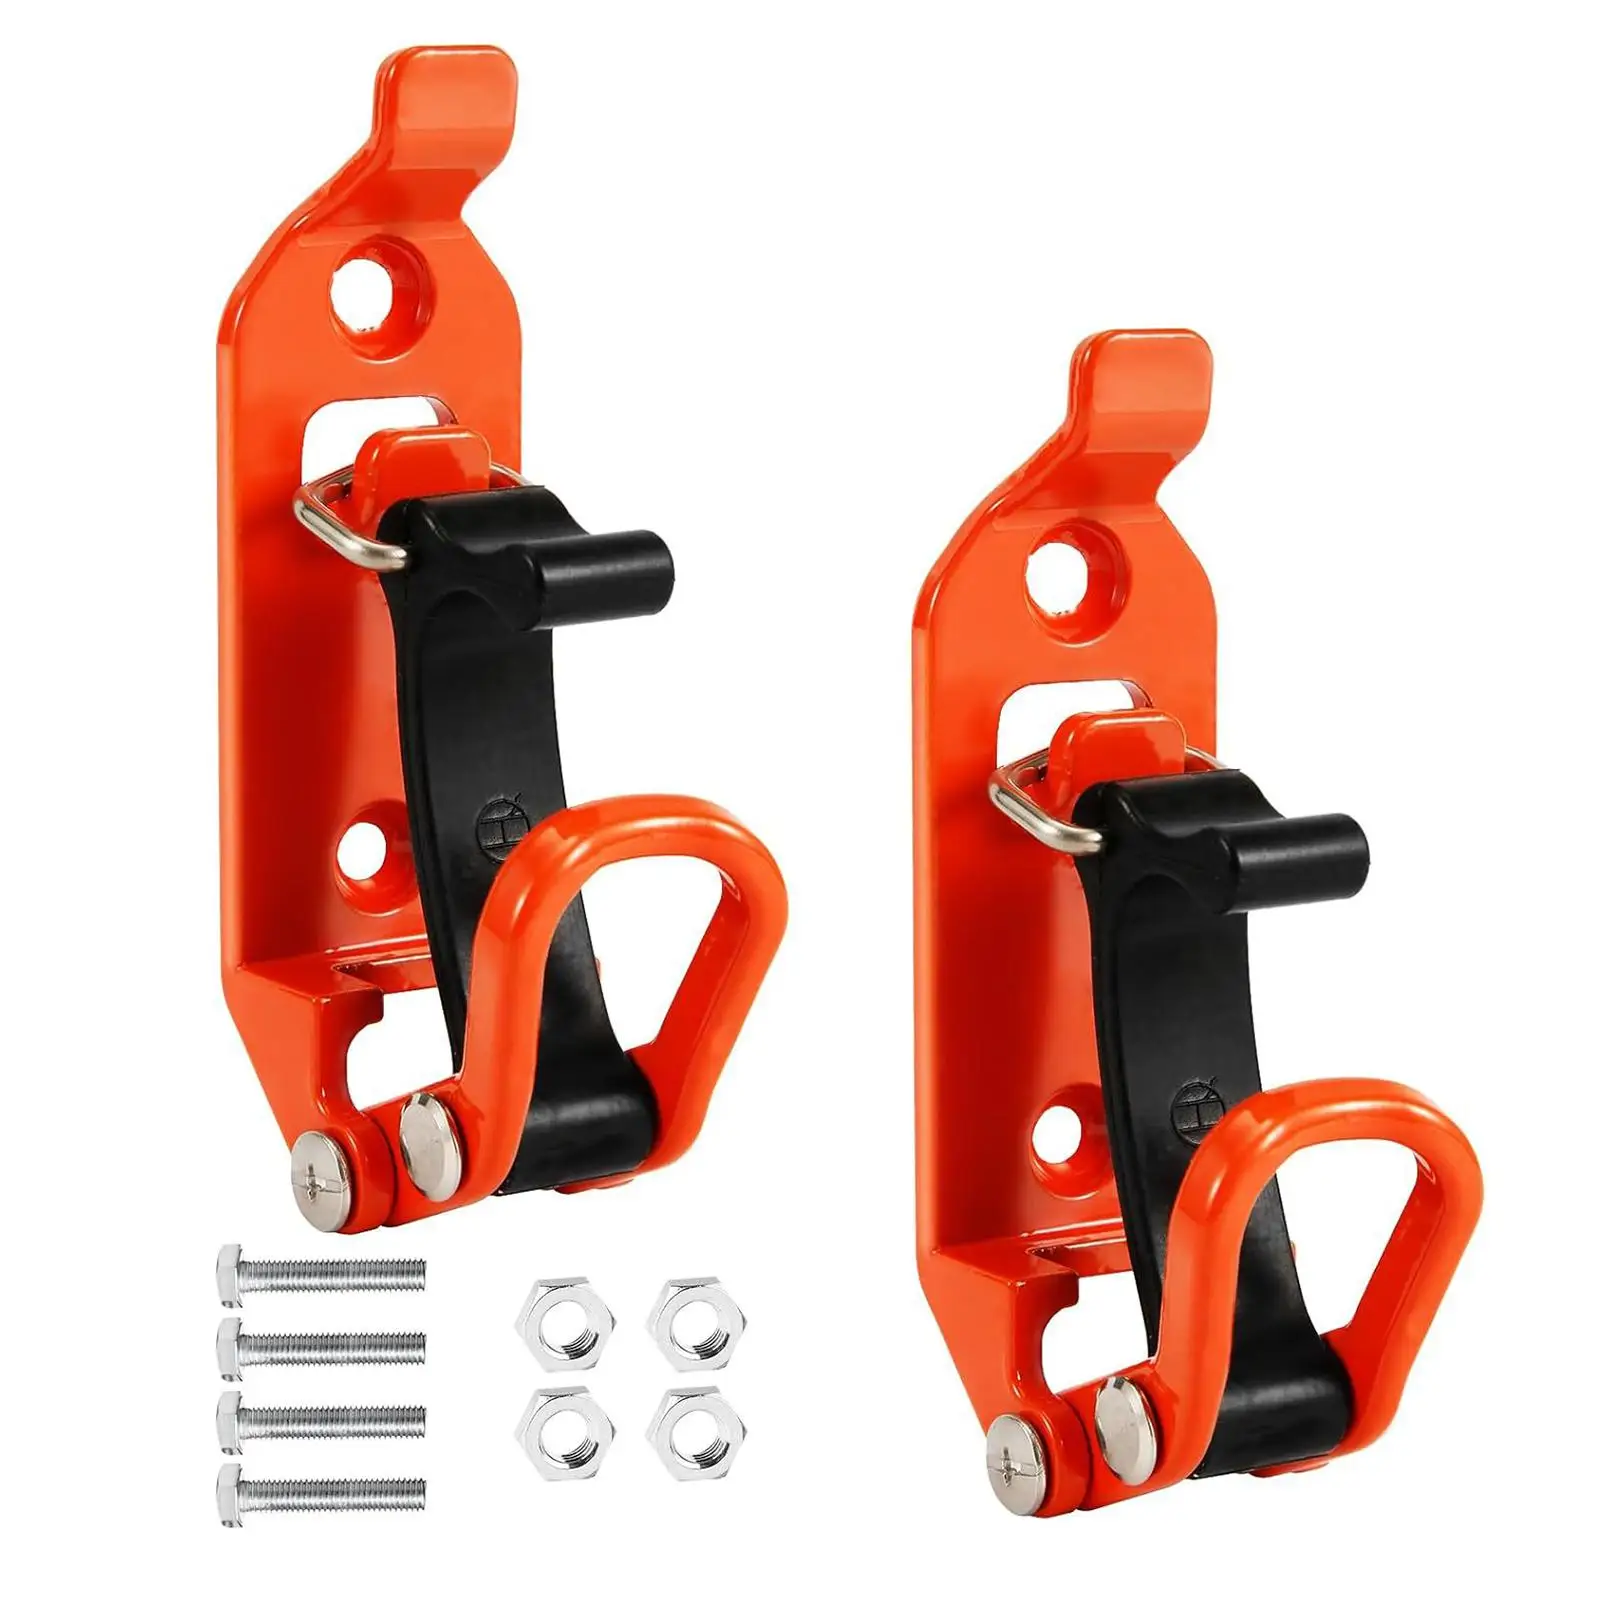 2 Pieces Shovel Mount for Roof Rack Heavy Duty with Screws Quick Insertion Strong Hammer Hanger Rubber Clamp Fixed Hammer Holder